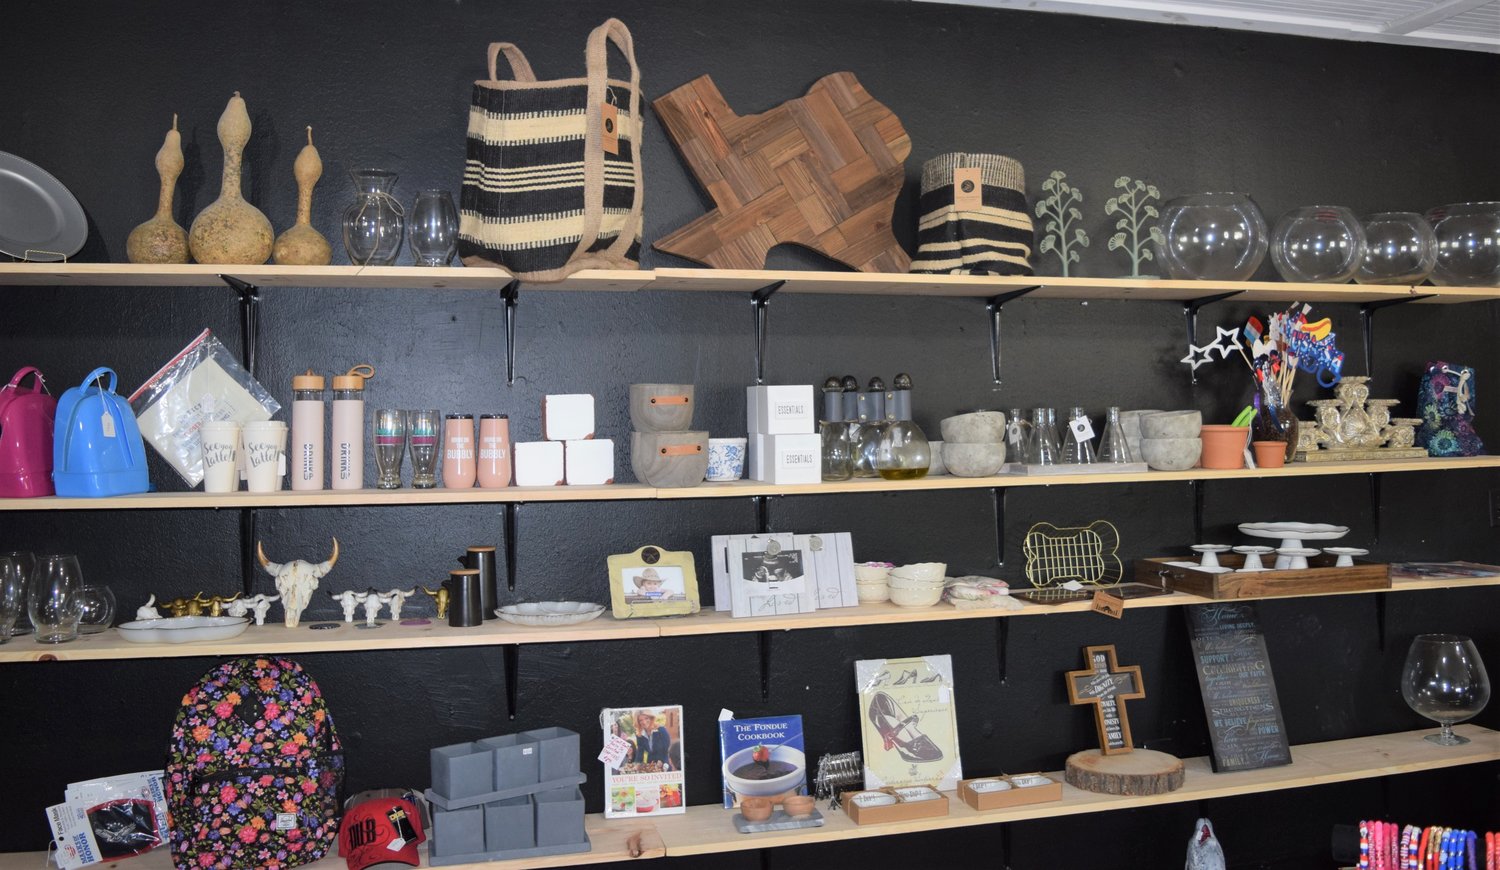 Bloomin’ 90’s inventory includes a wide variety of options. Handcrafted items such as gourd art and Texas-shaped cutting boards sit alongside craft supplies and cookware on the gift shop’s shelves.